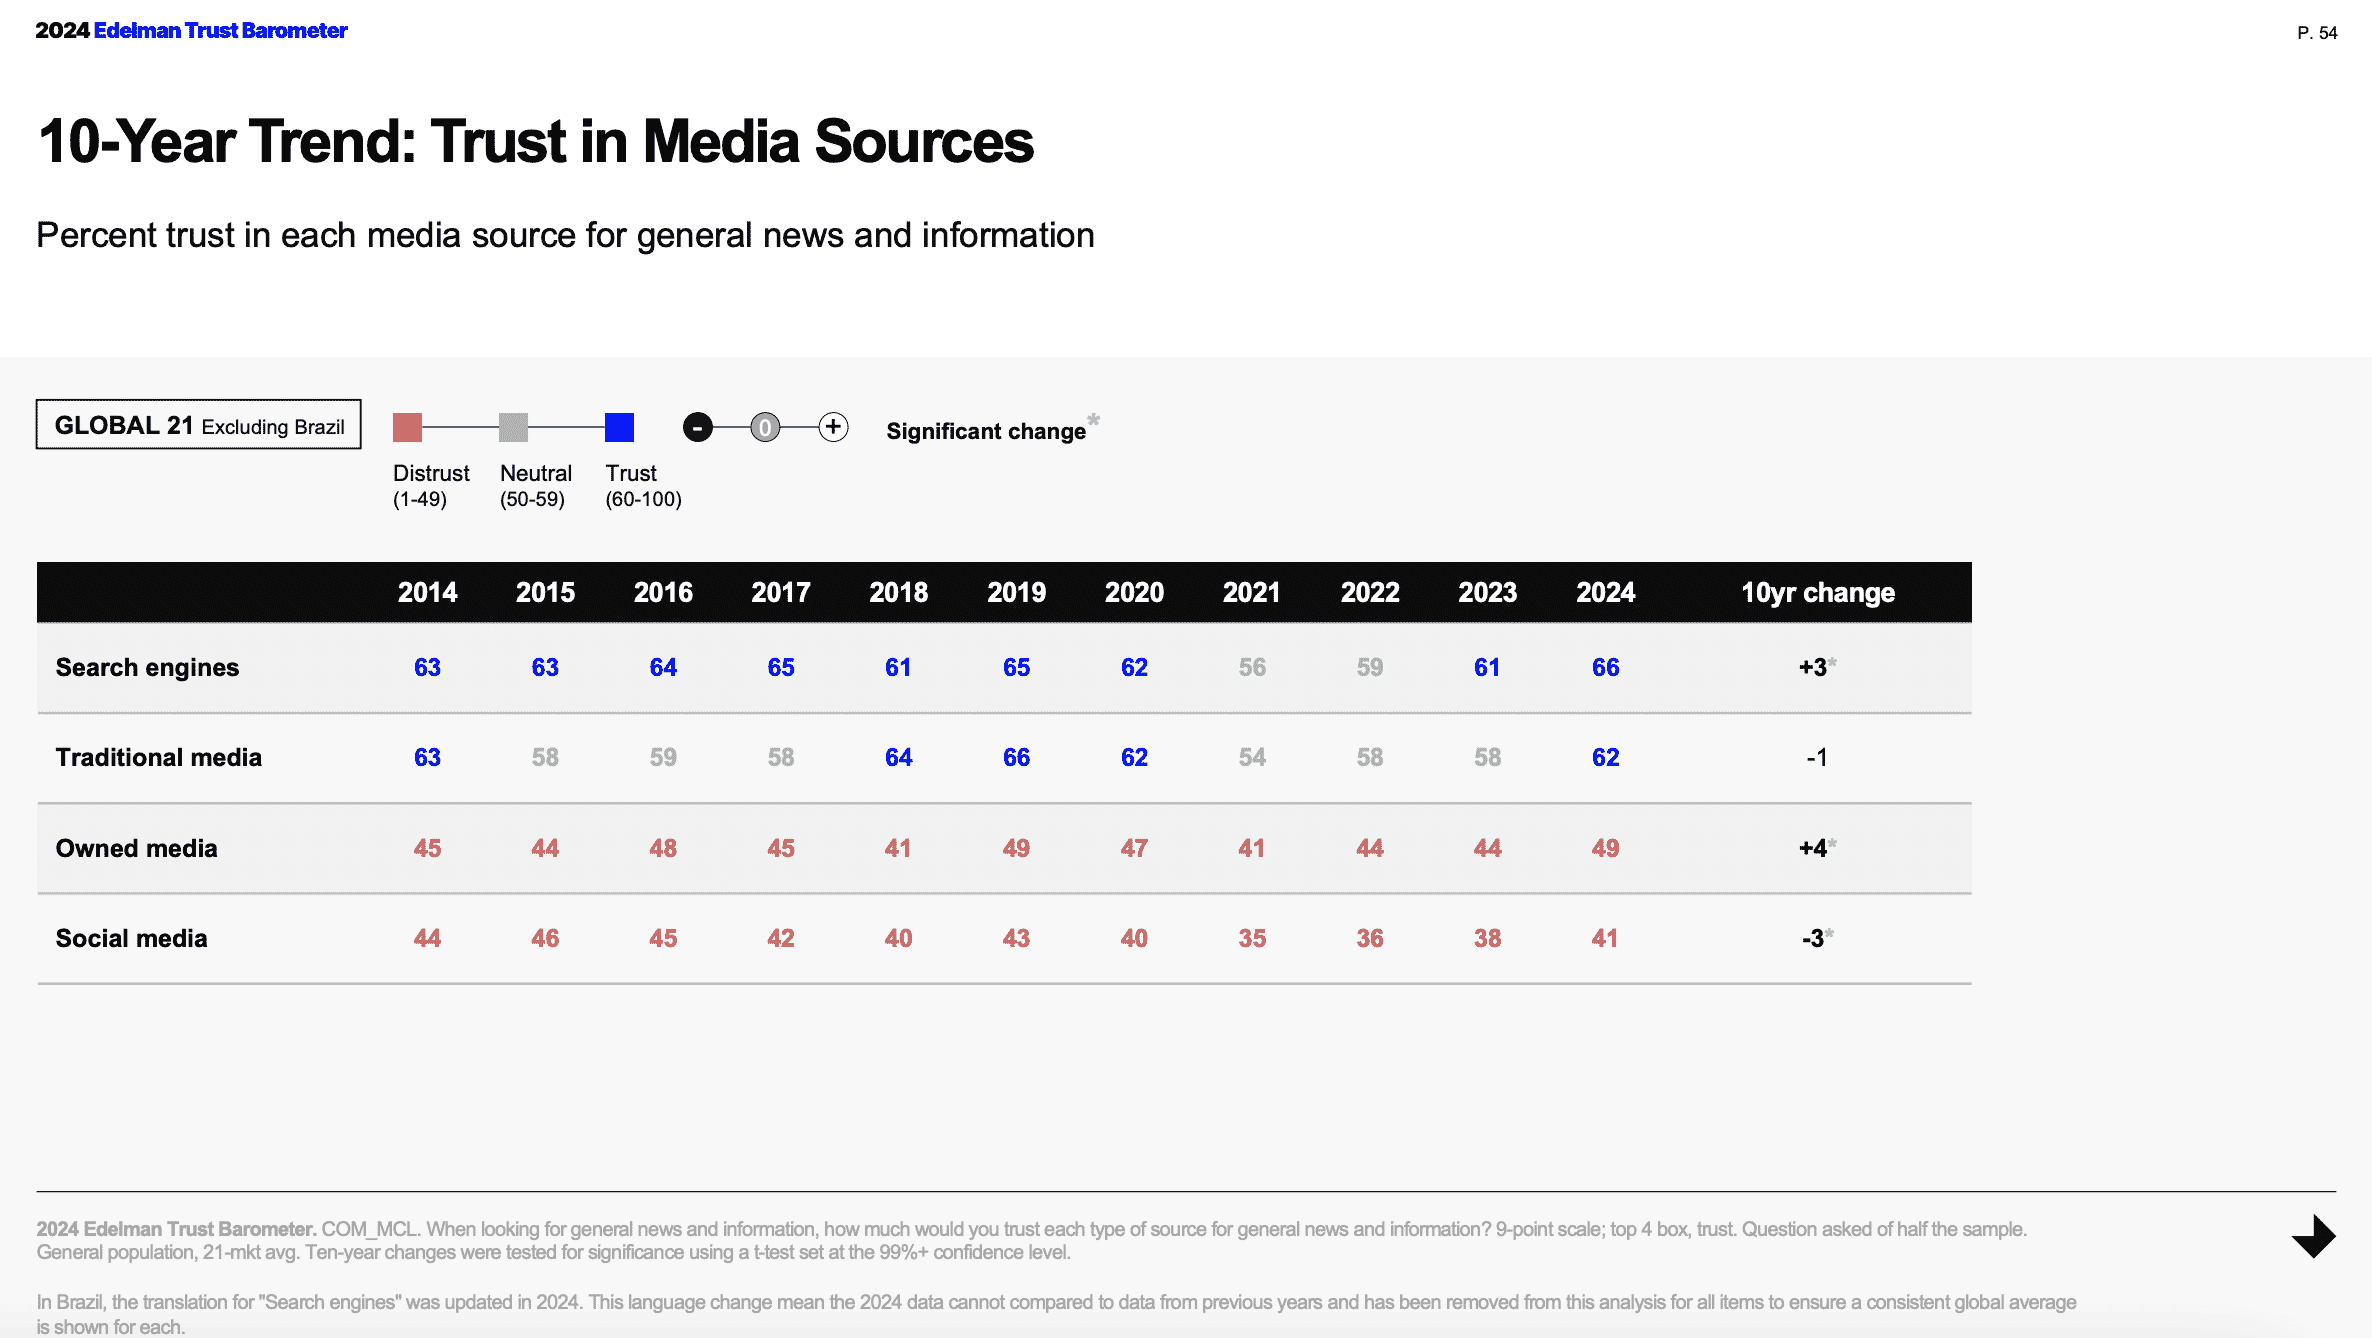 Slide tracking the trust in search, traditional media, owned media, and social media over the last ten years